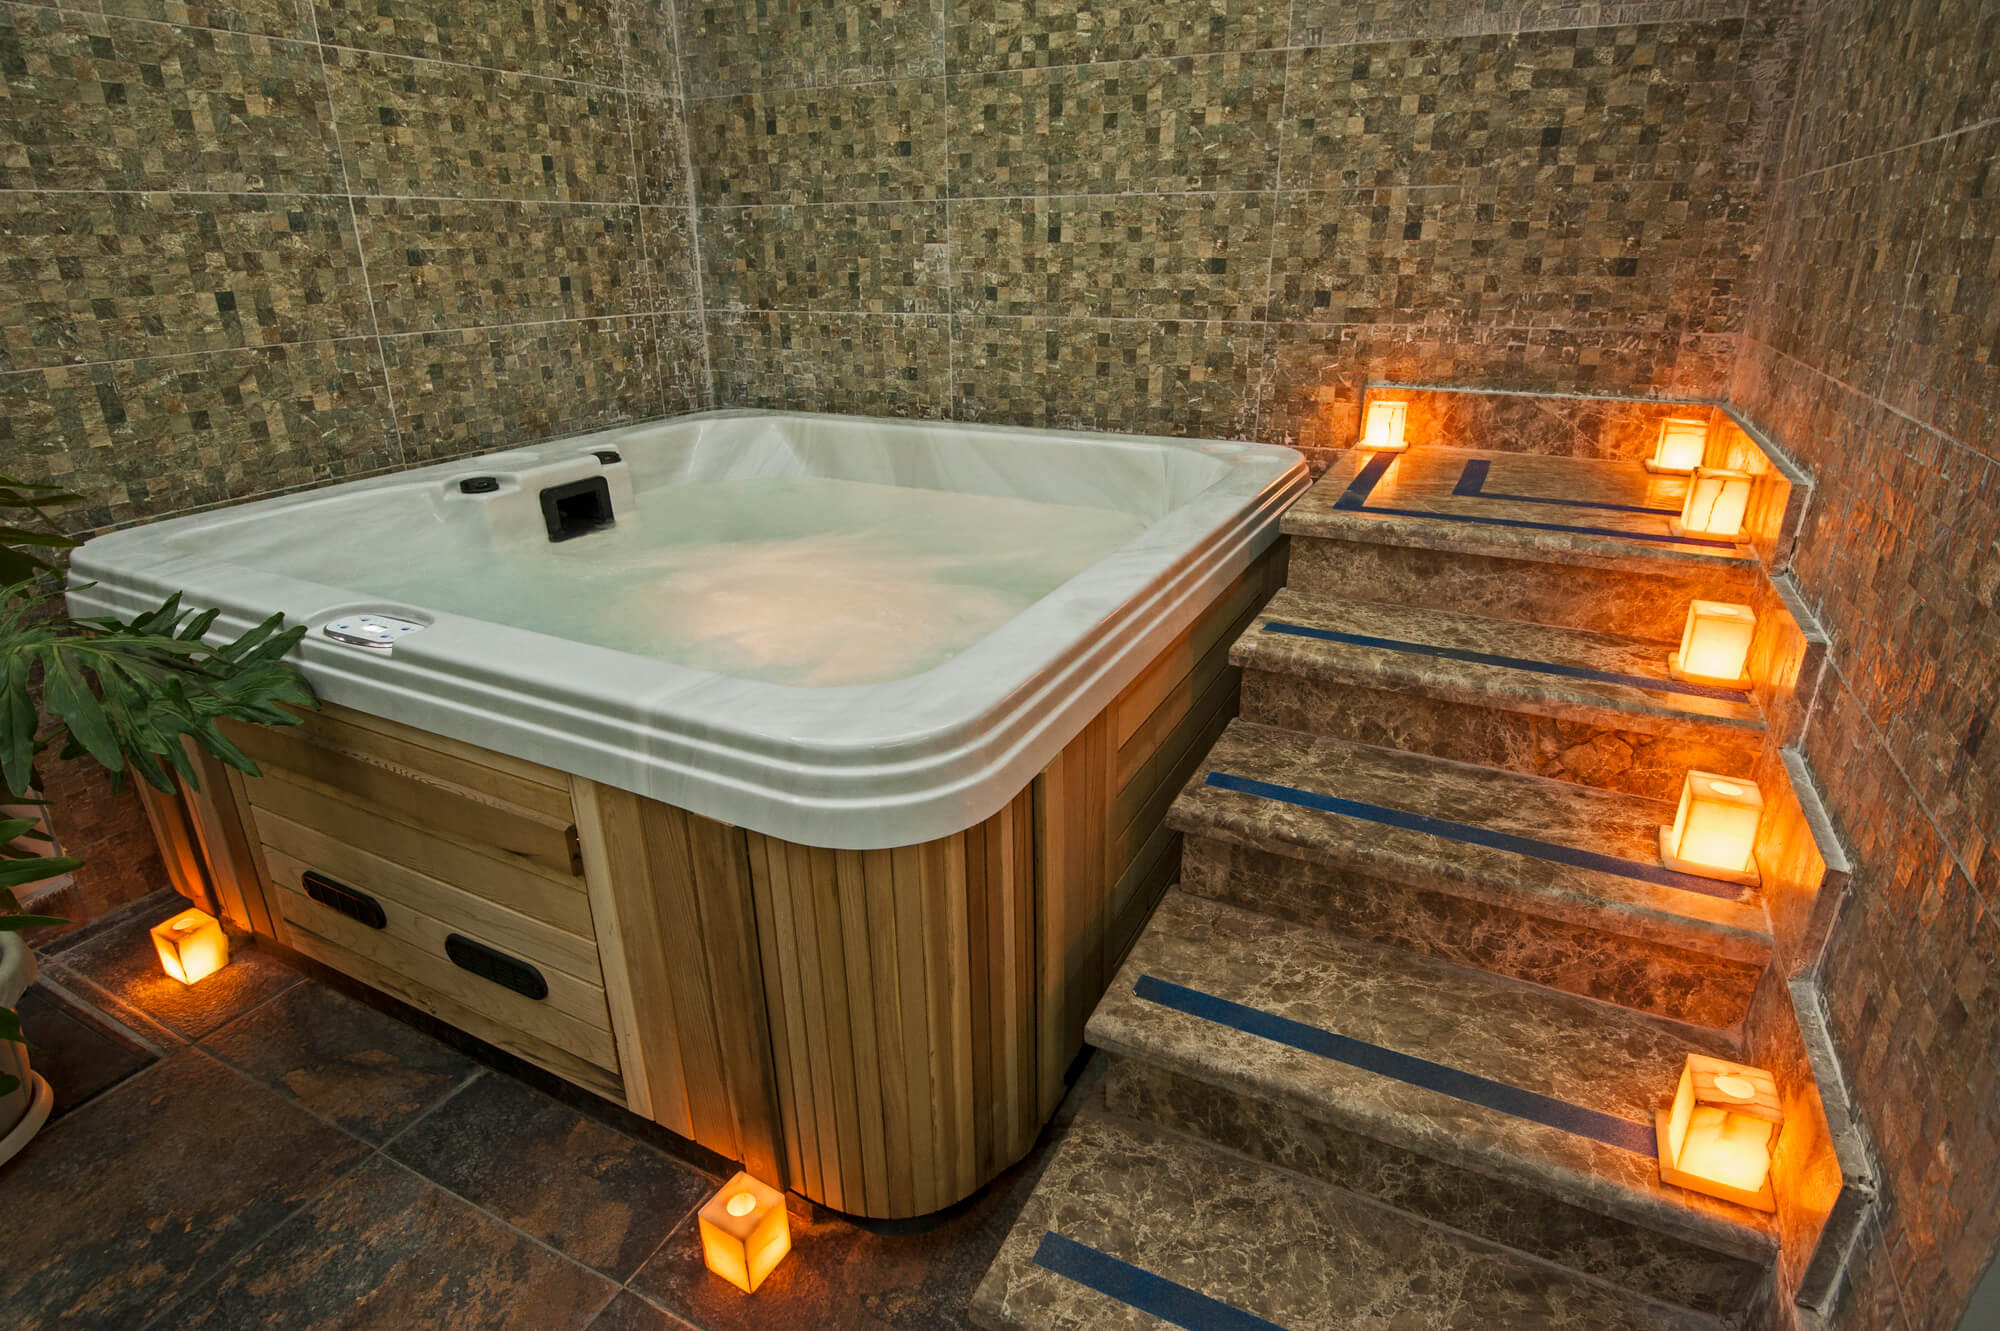 Large jacuzzi with wooden side and stairs